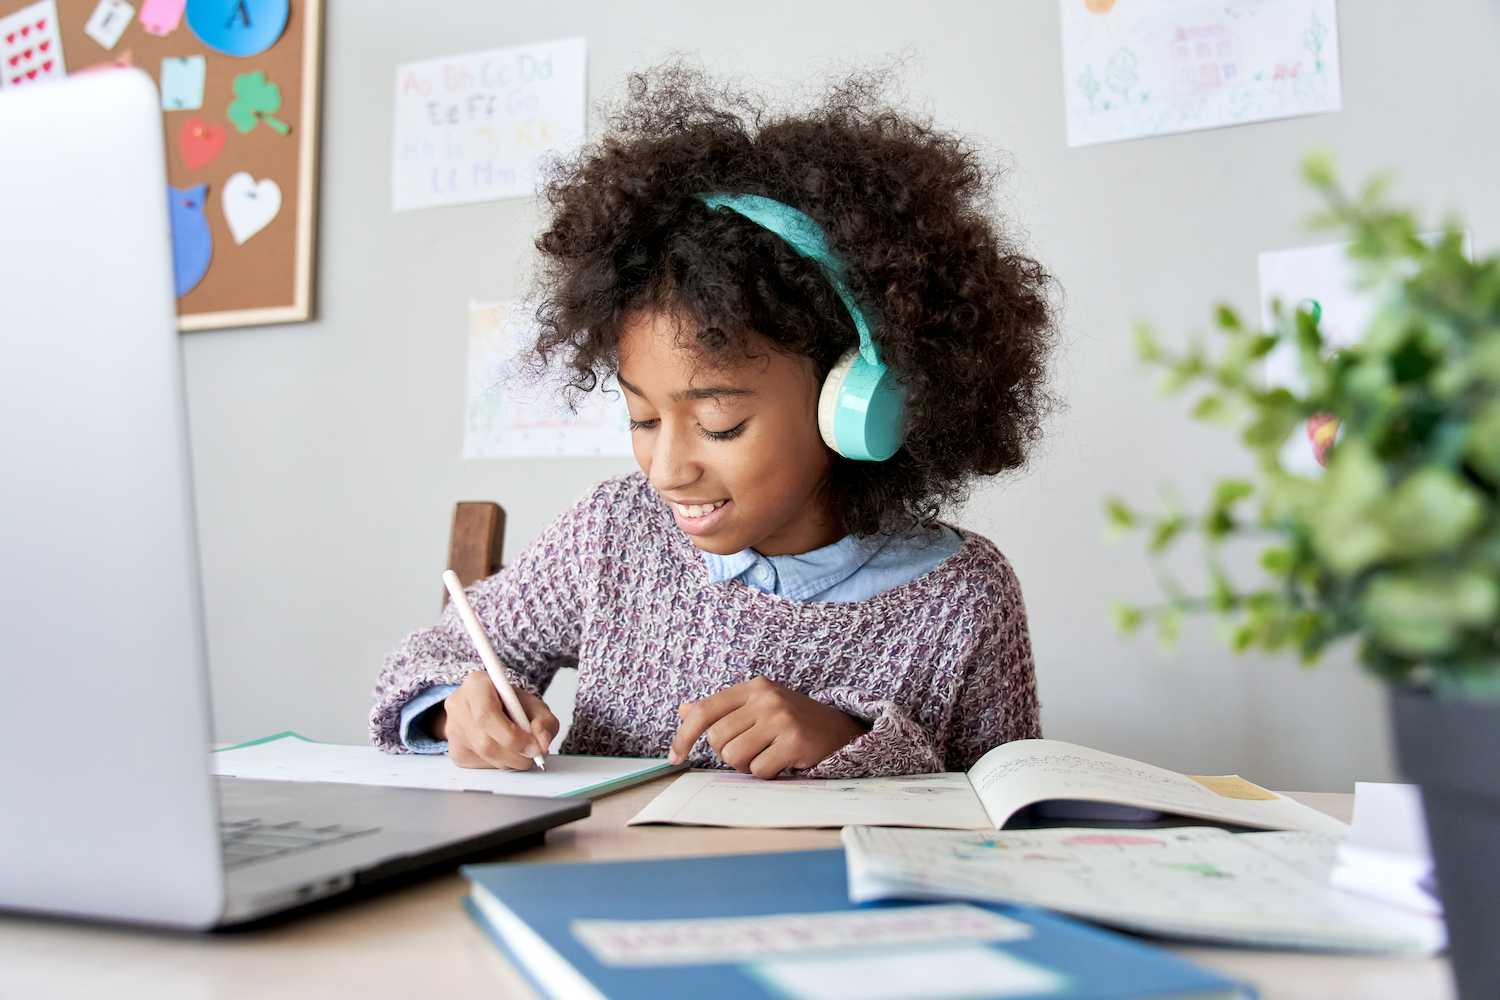 Girl with curly hair wearing jumper and headphones completing distance education online